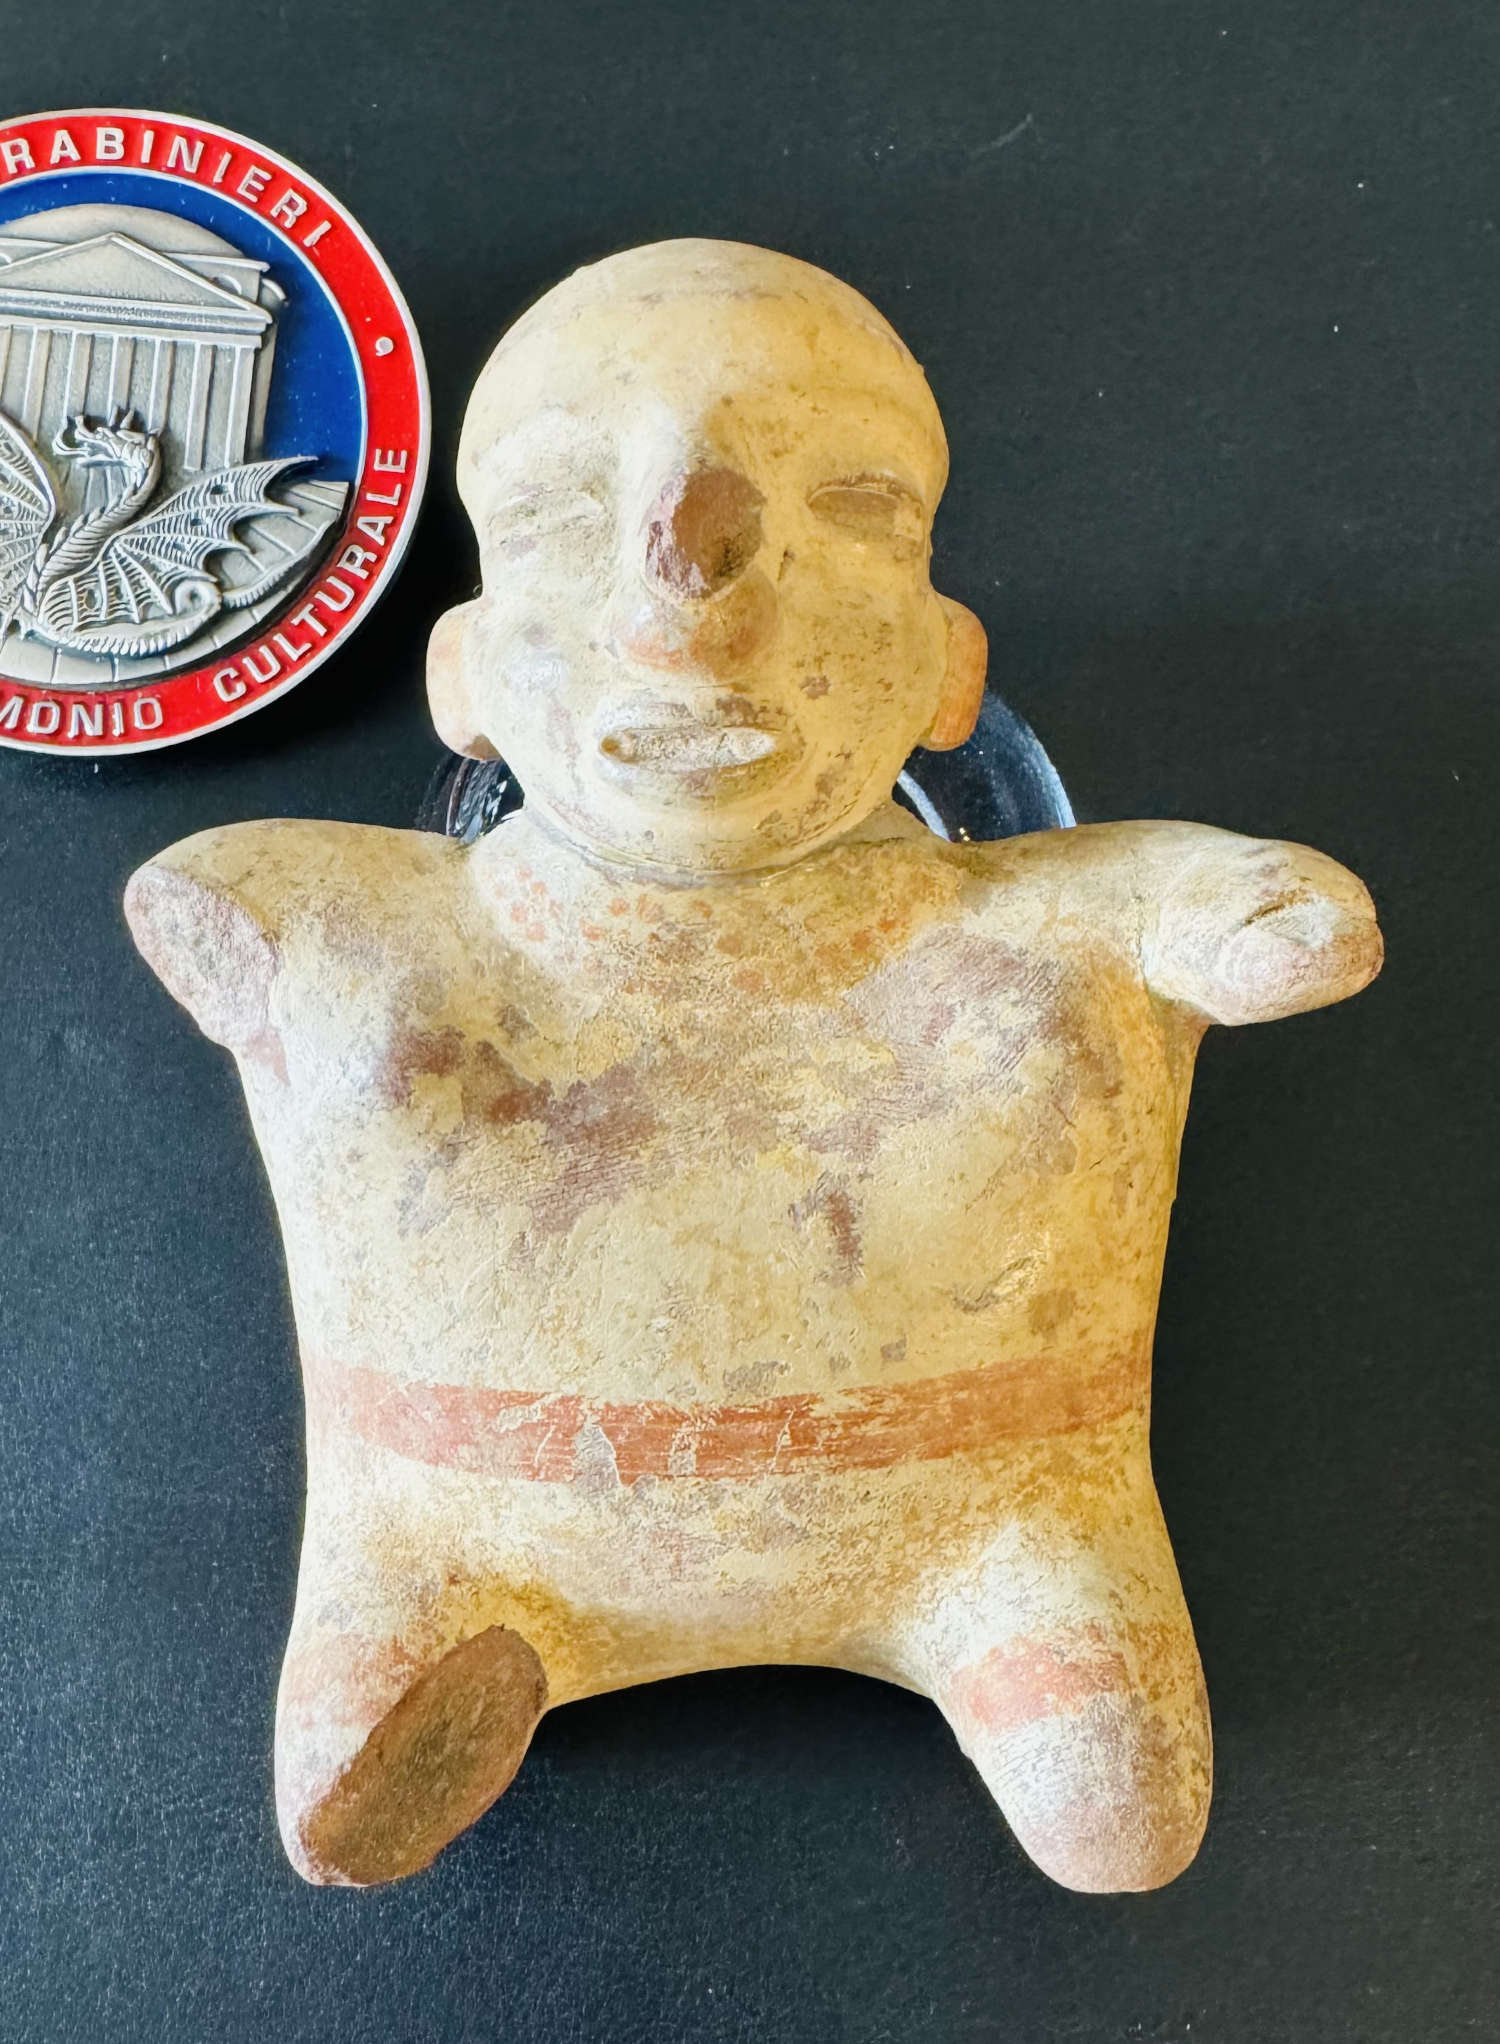 Rome, Carabinieri deliver two valuable Mesoamerican artifacts to Museum ...